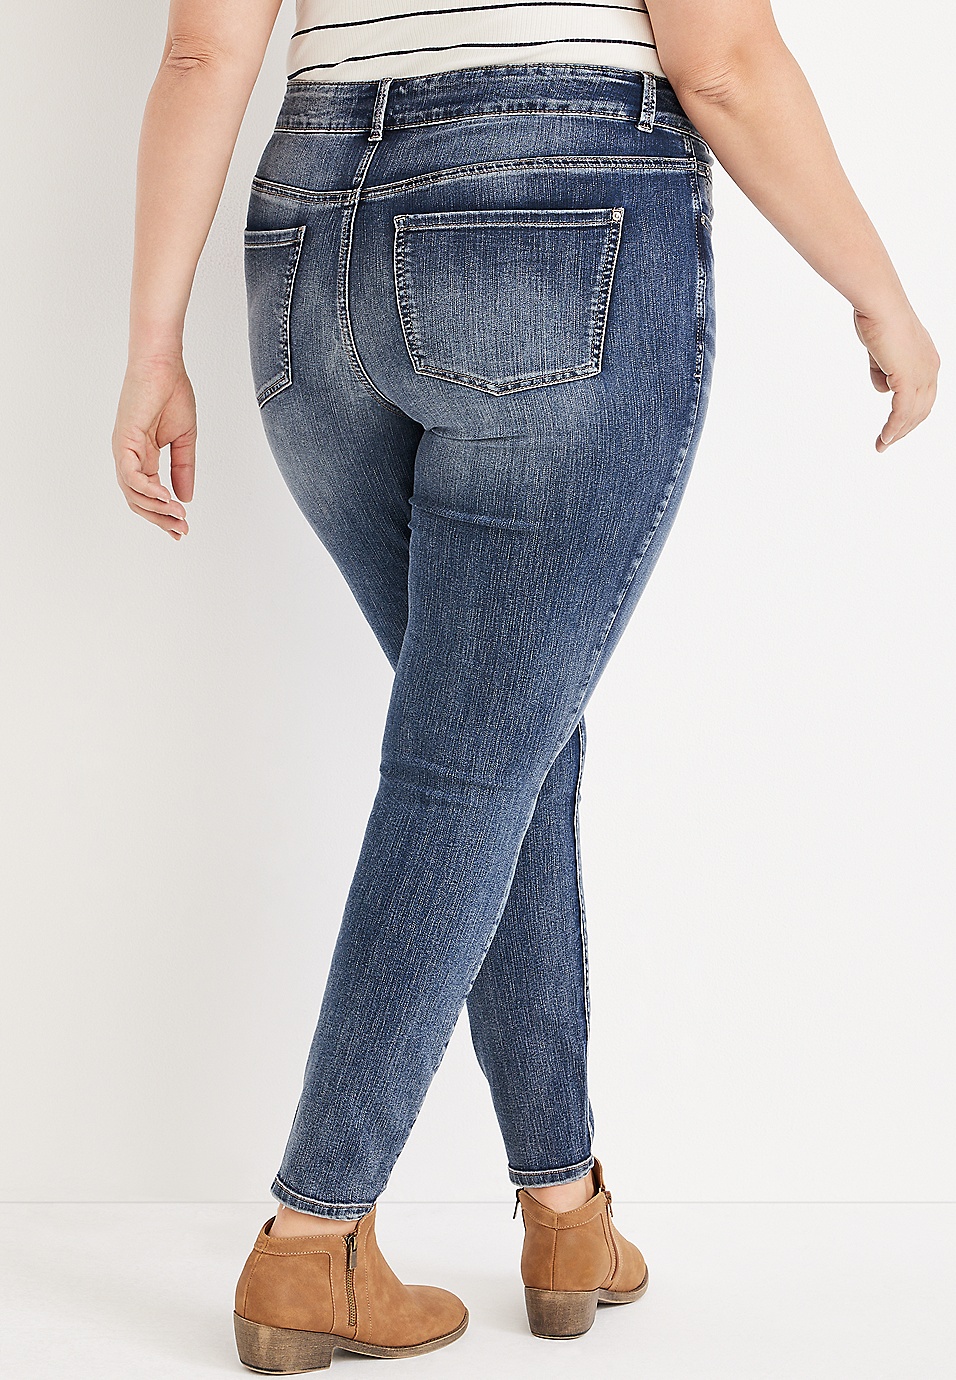 Plus Size m jeans by maurices™ Everflex™ Super Skinny High Rise Stretch Jean